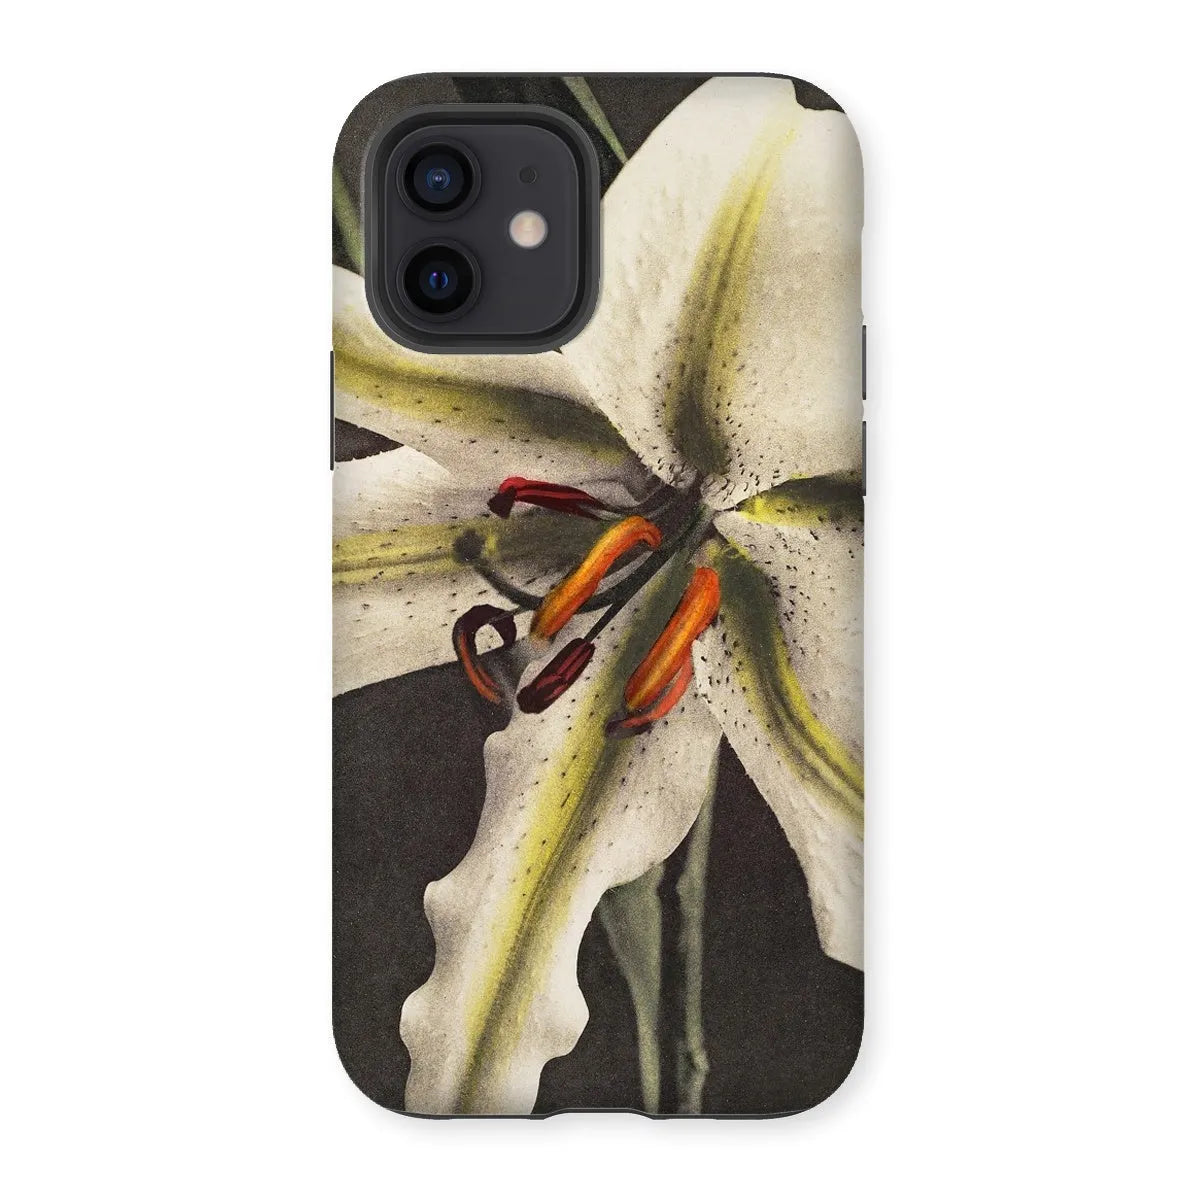 Lily By Kazumasa Ogawa Art Phone Case - Iphone 12 / Matte - Mobile Phone Cases - Aesthetic Art